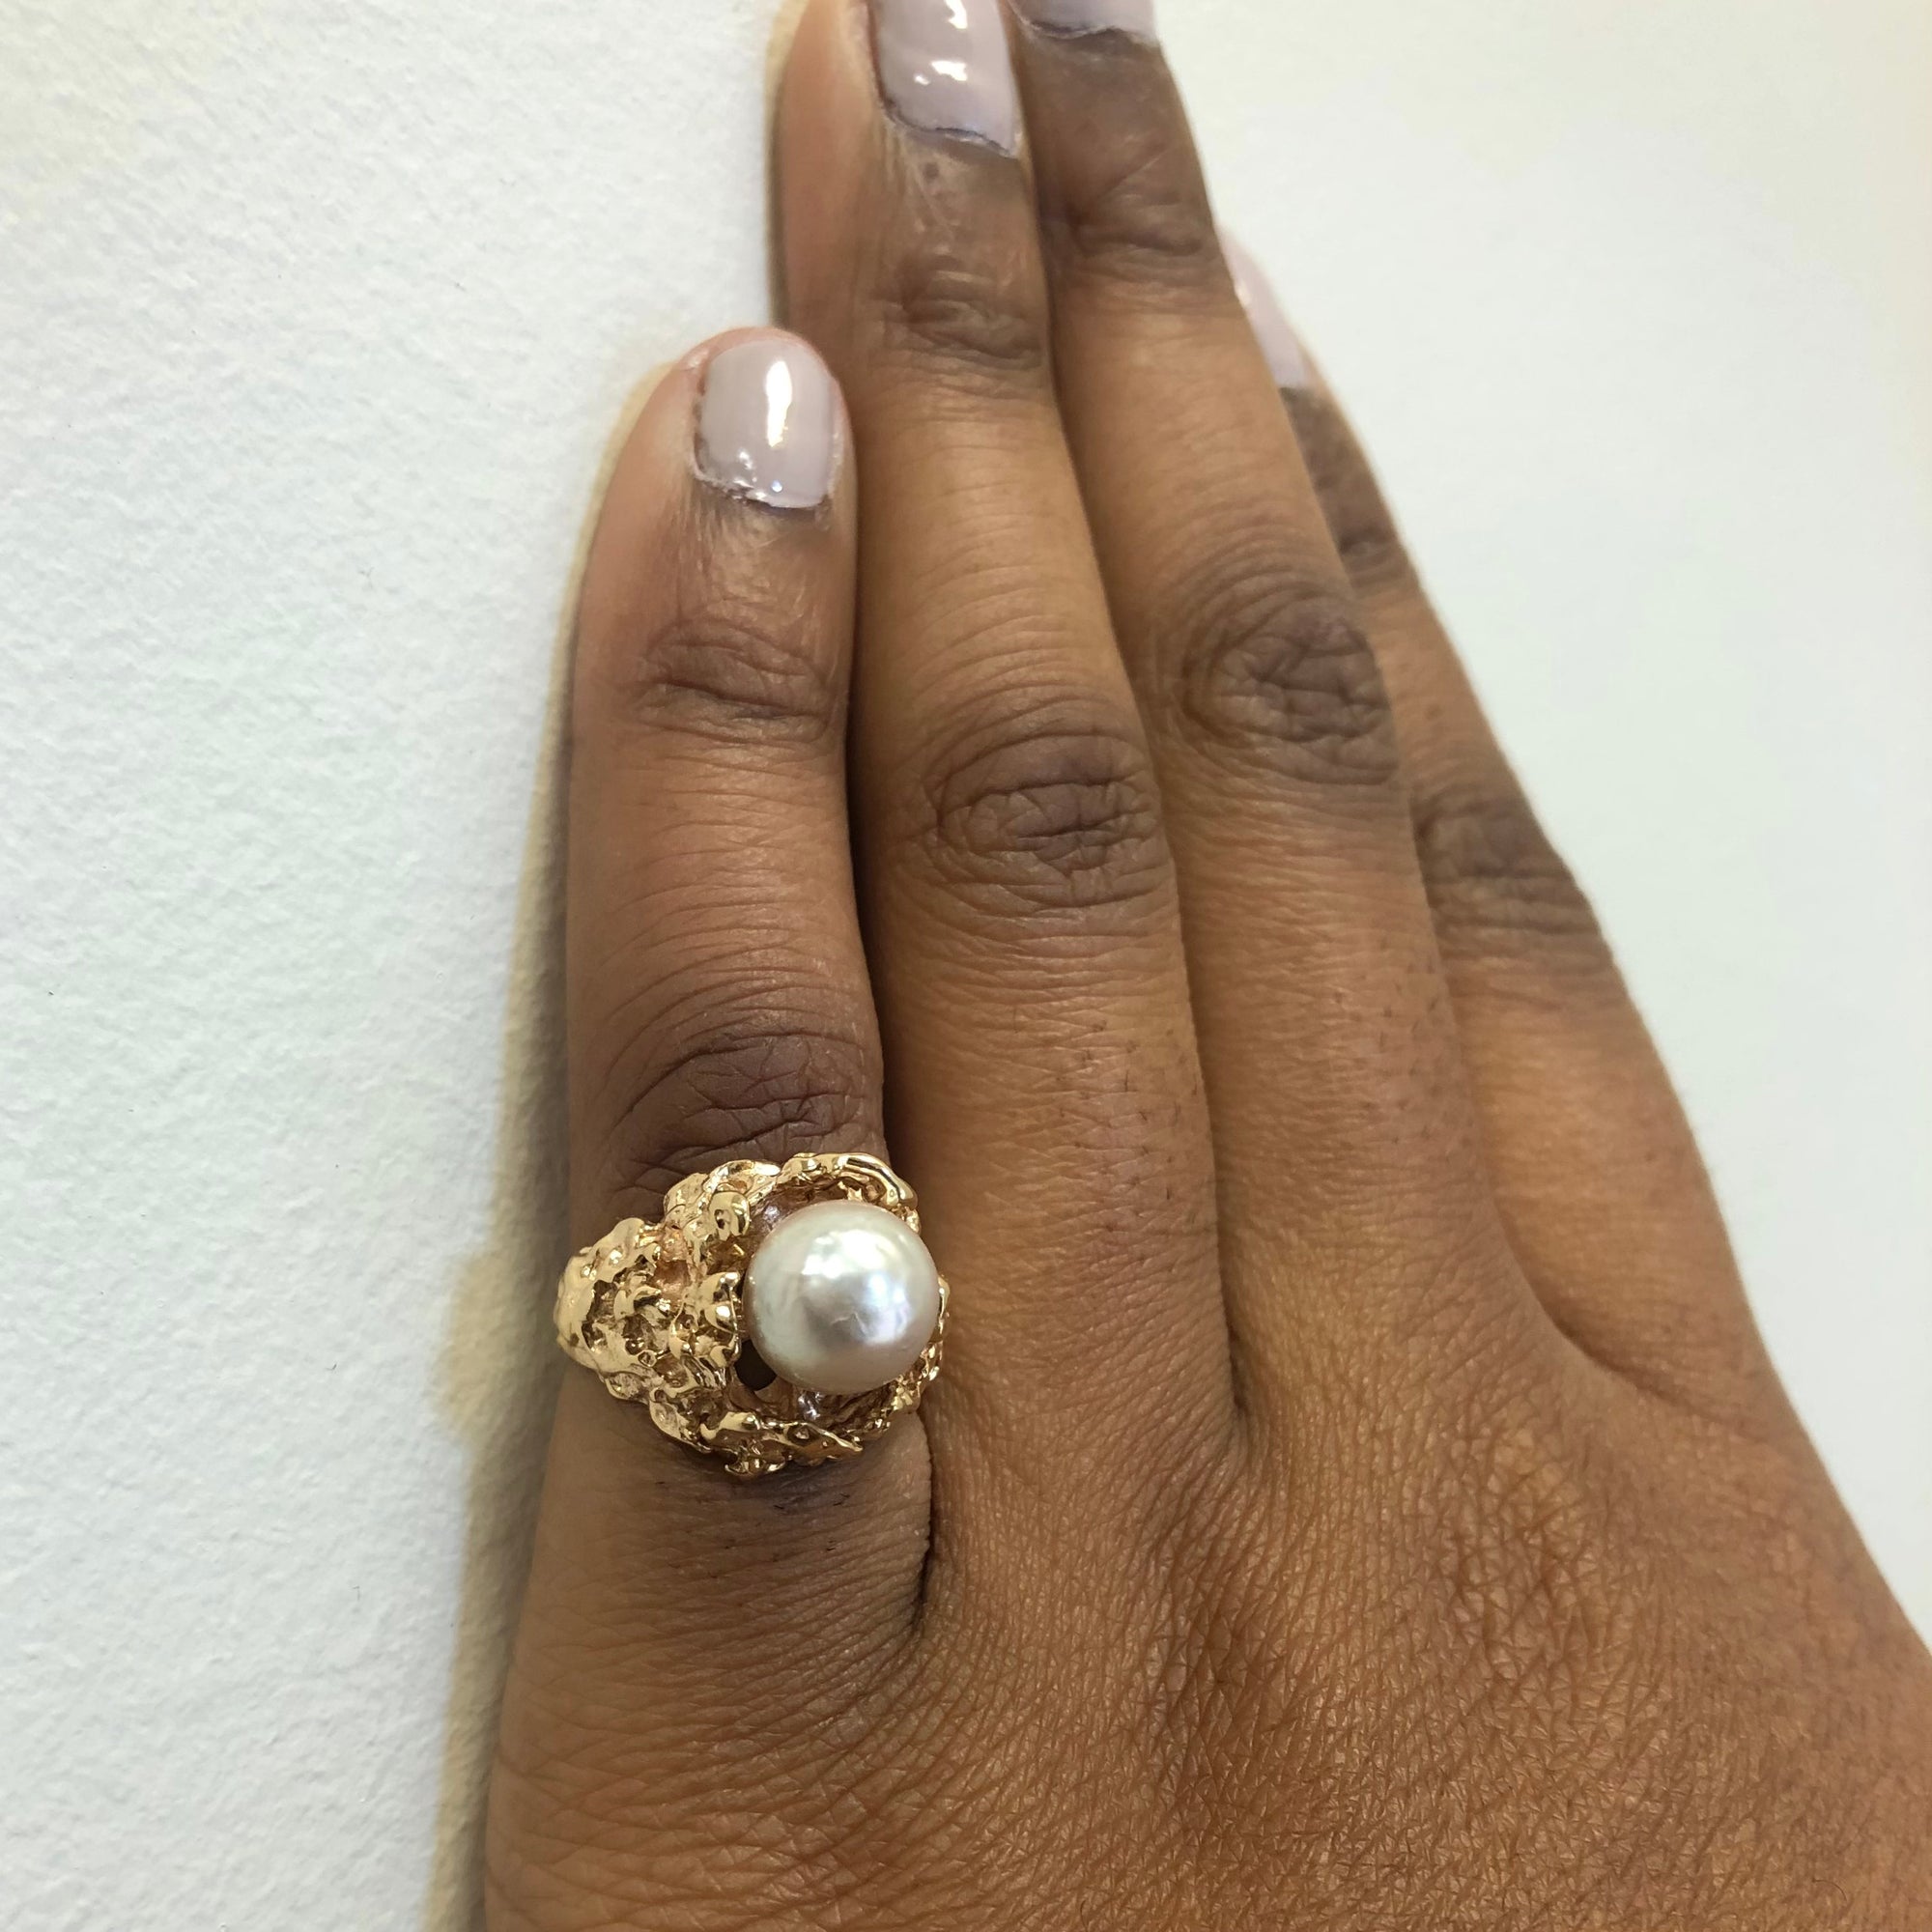 Textured Pearl Cocktail Ring | 5.15ct | SZ 5.5 |